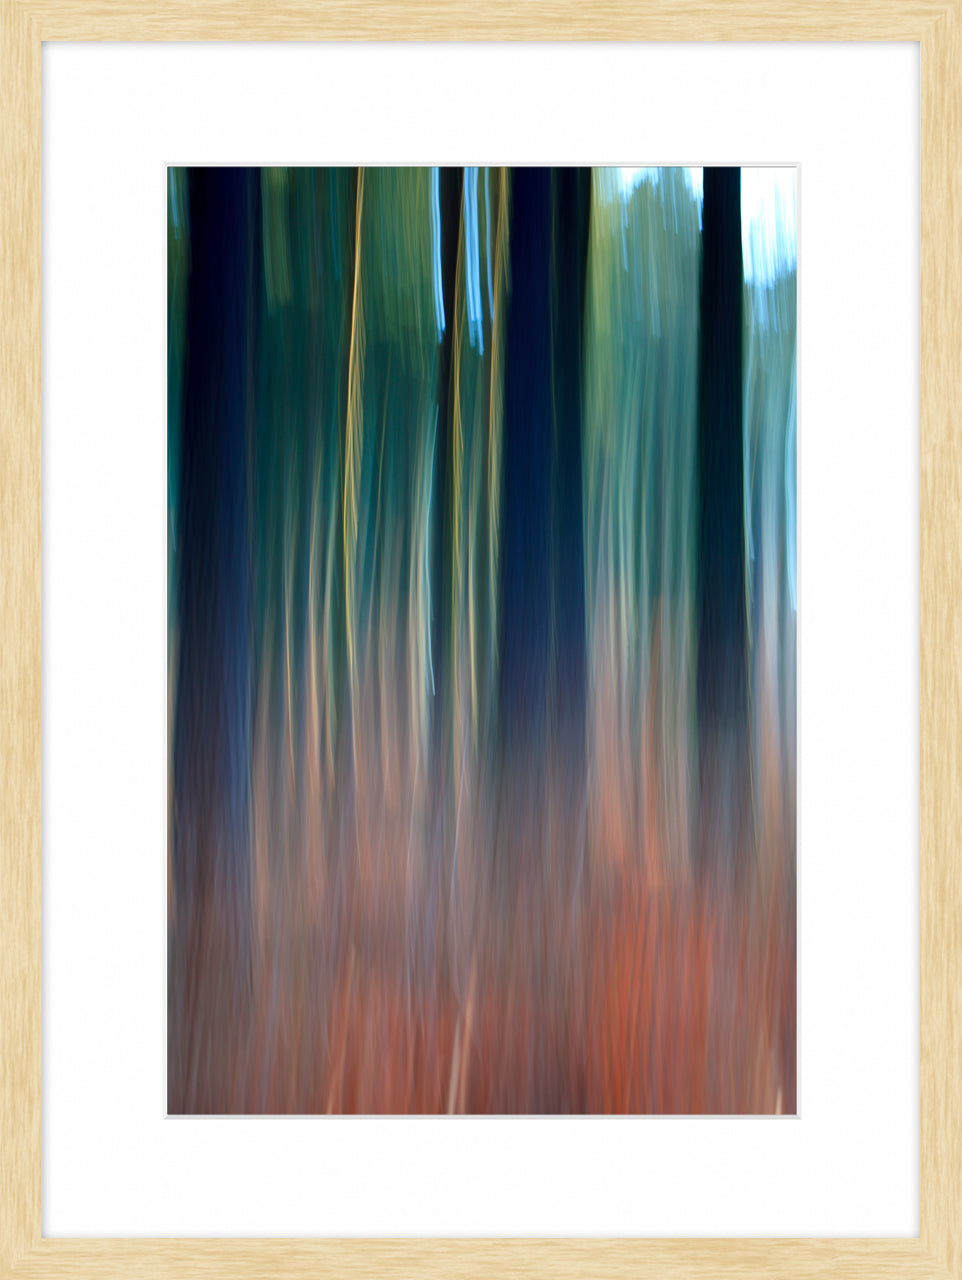 In the Forest III, 2013